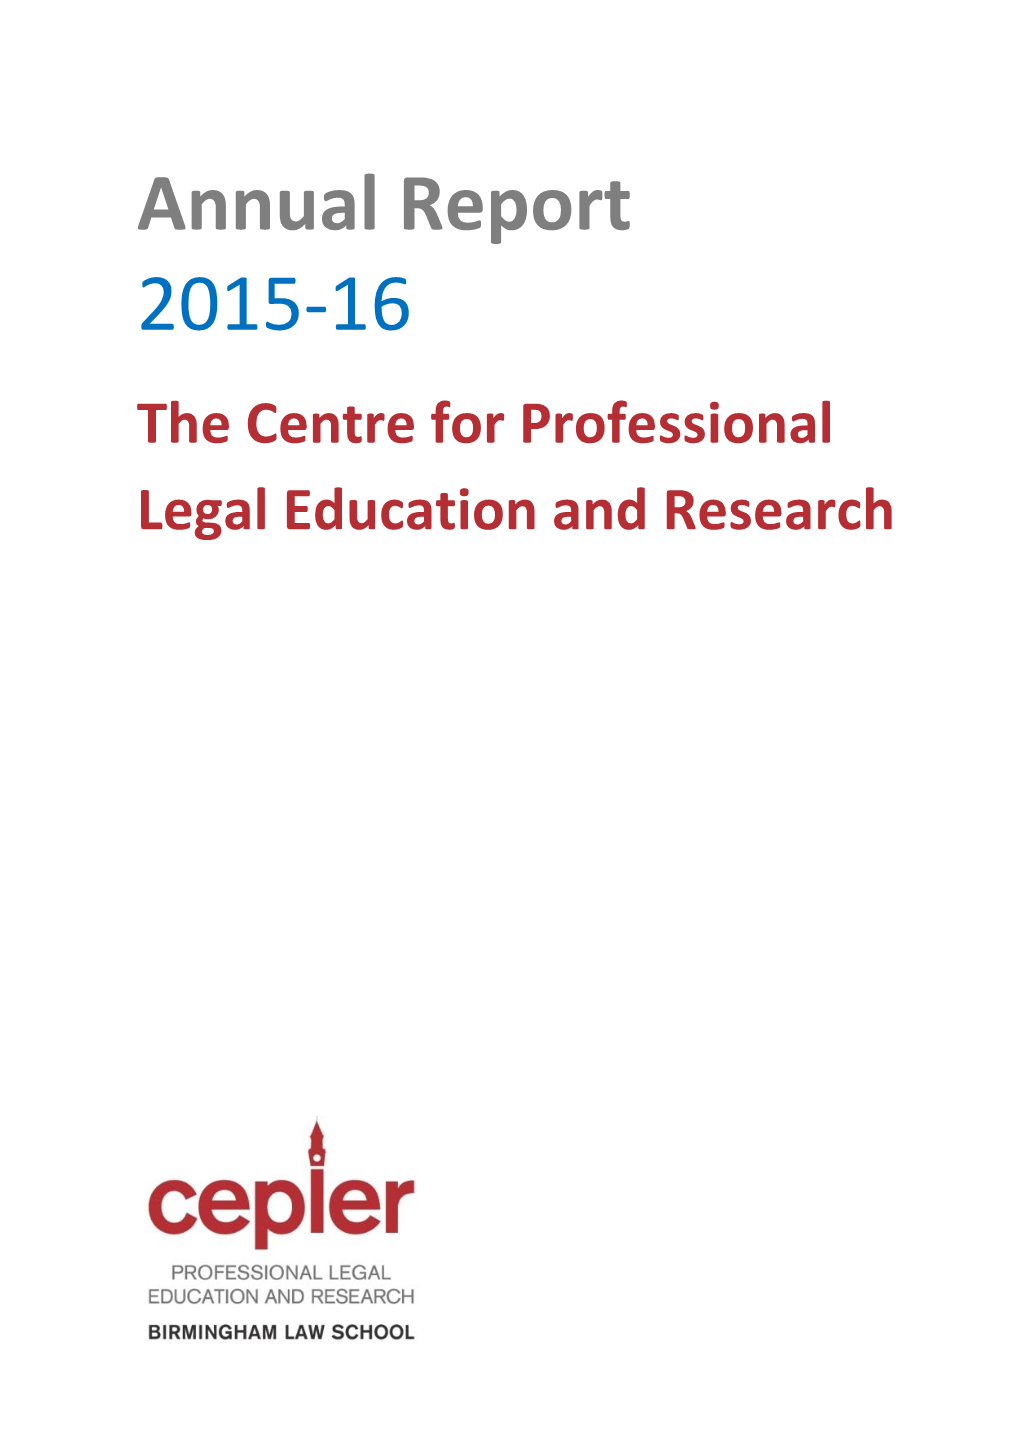 Annual Report 2015-16 the Centre for Professional